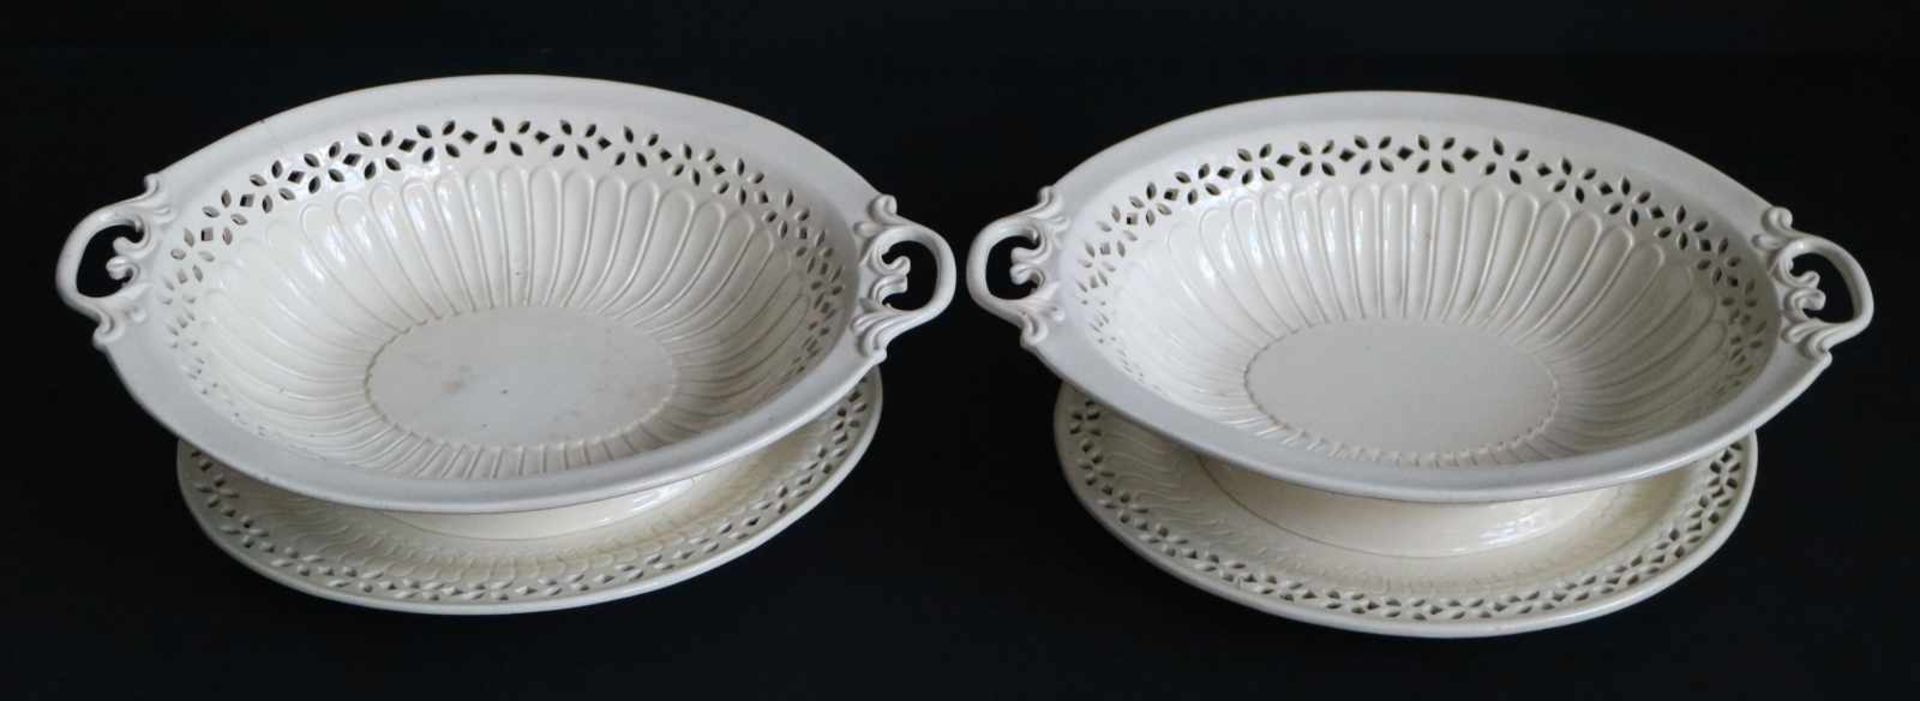 SEWELLS & DUNKIN pottery2 bowls with oval saucer marked Firma Sewell & Dunkin 1821 - 1852